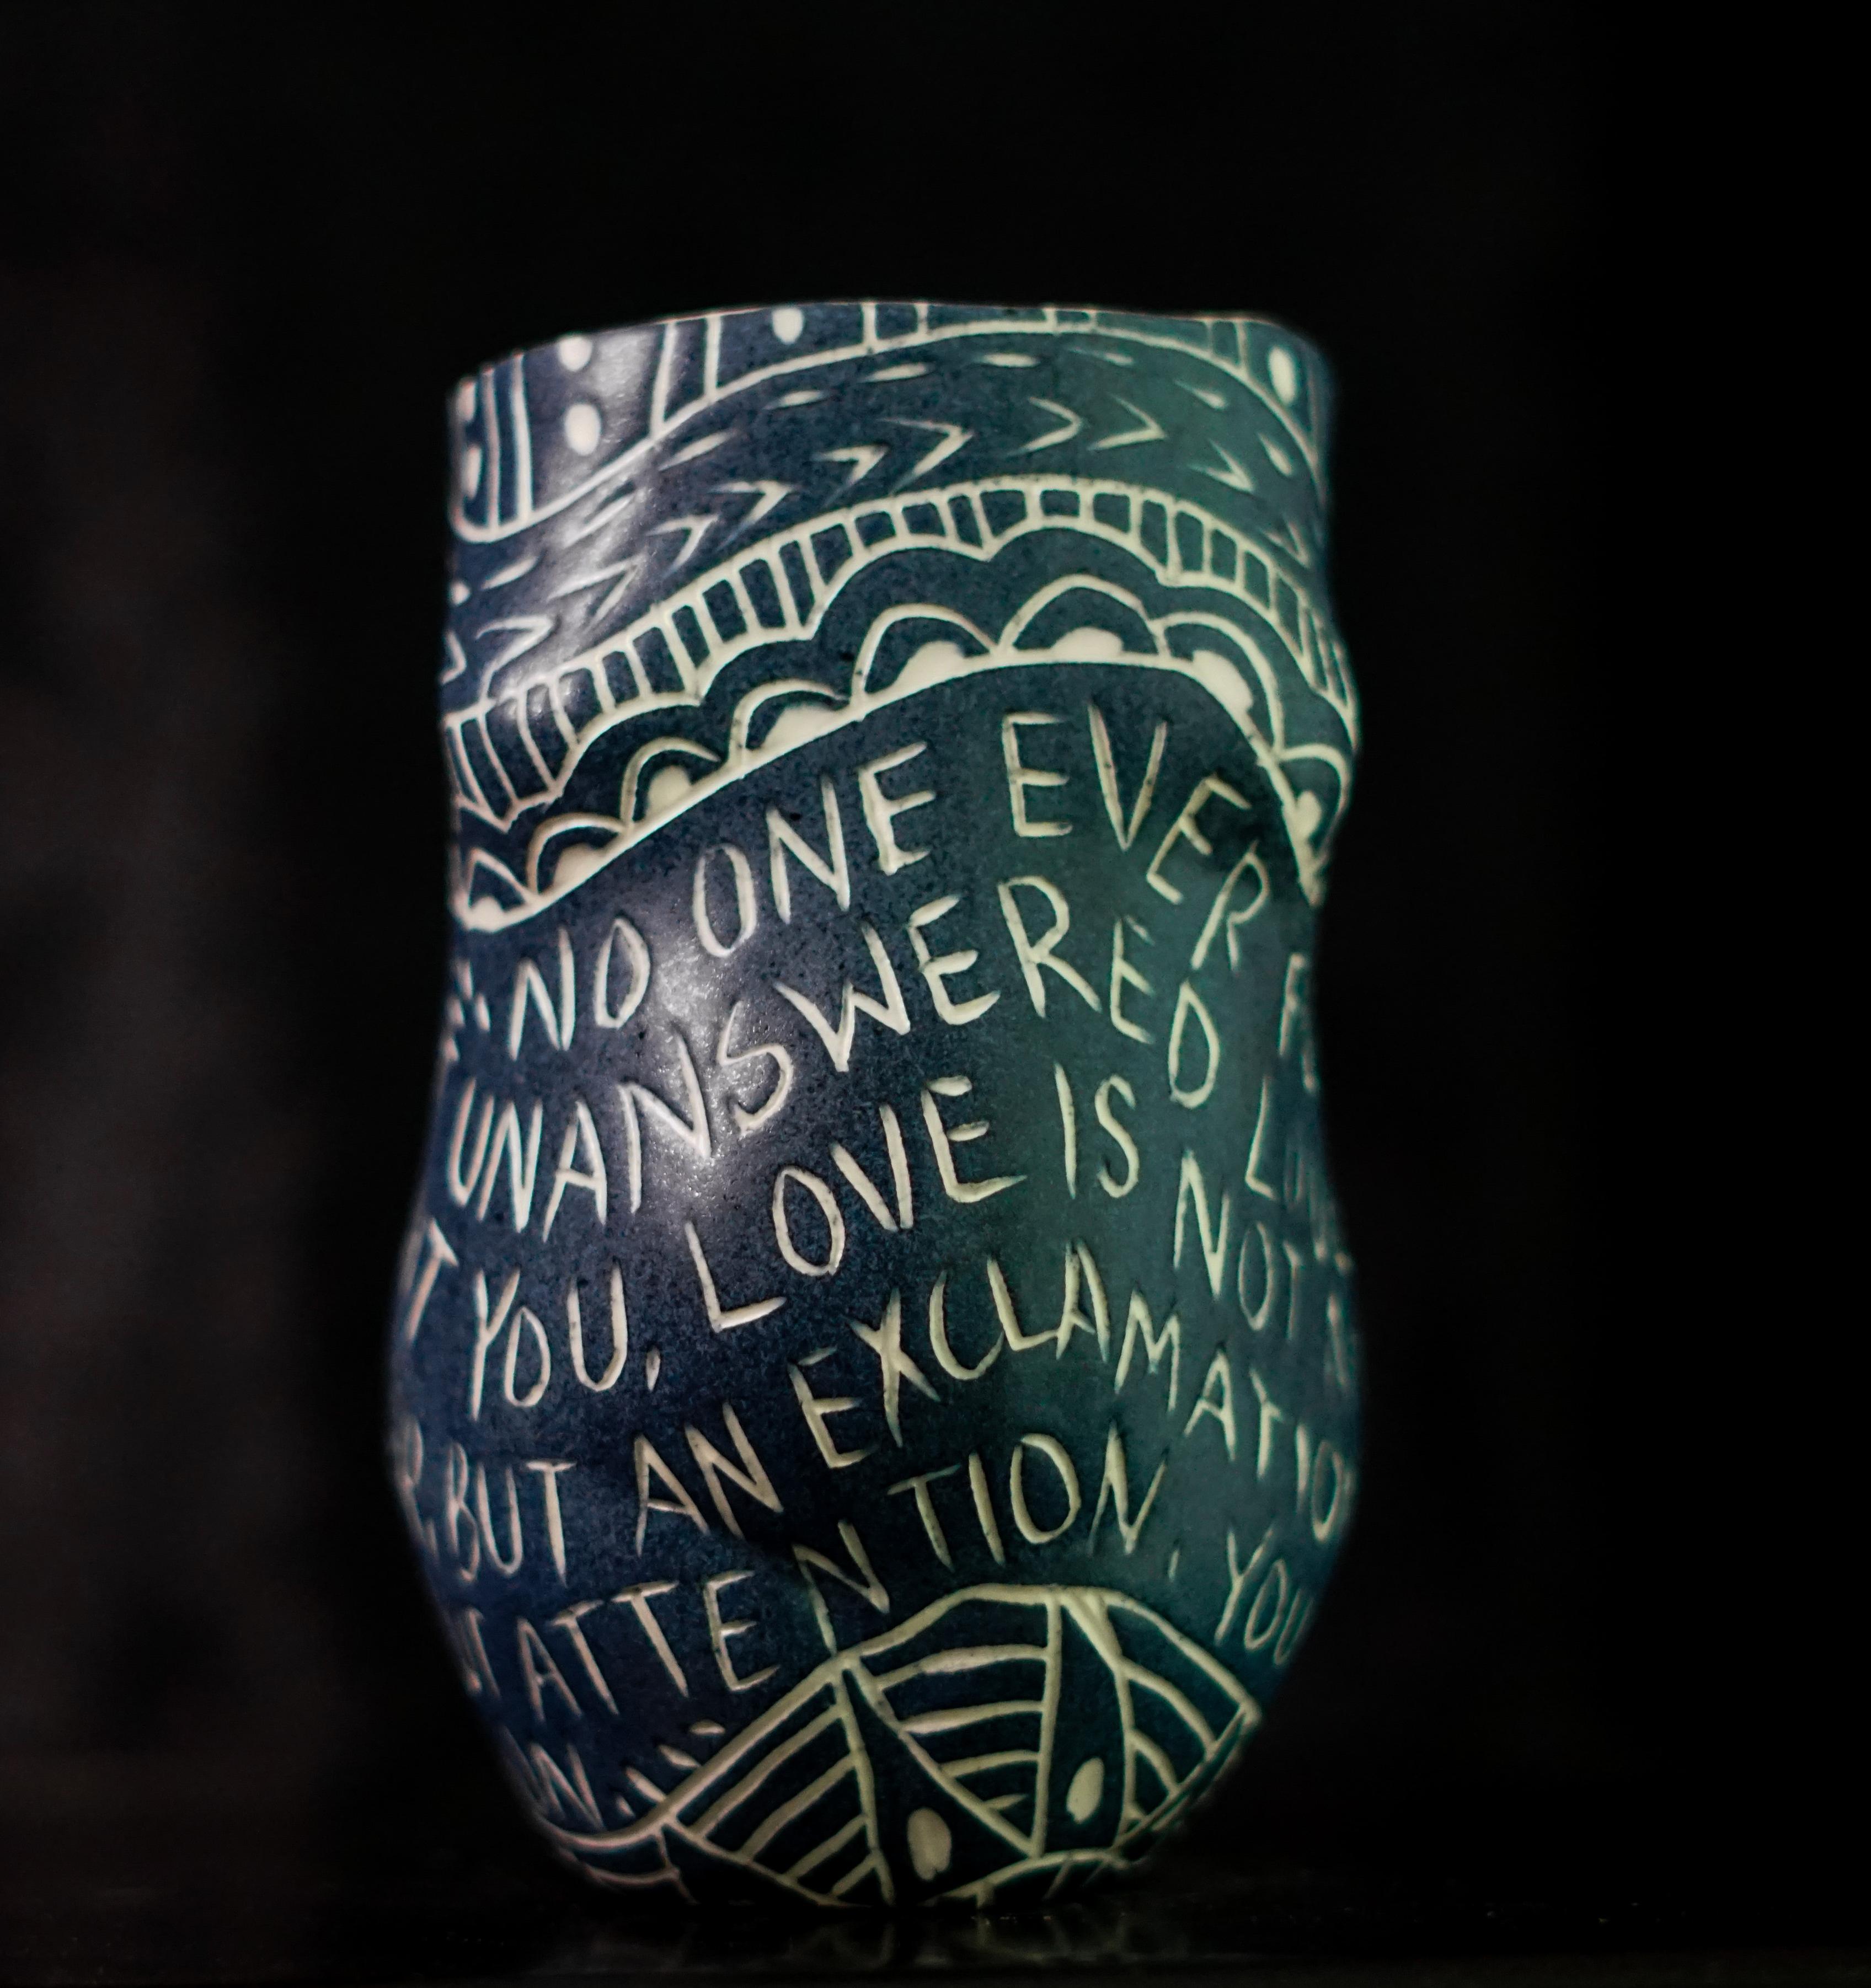 Alex Hodge Abstract Sculpture - “No One Ever Fed You...” Porcelain cup with sgraffito detailing by the artist